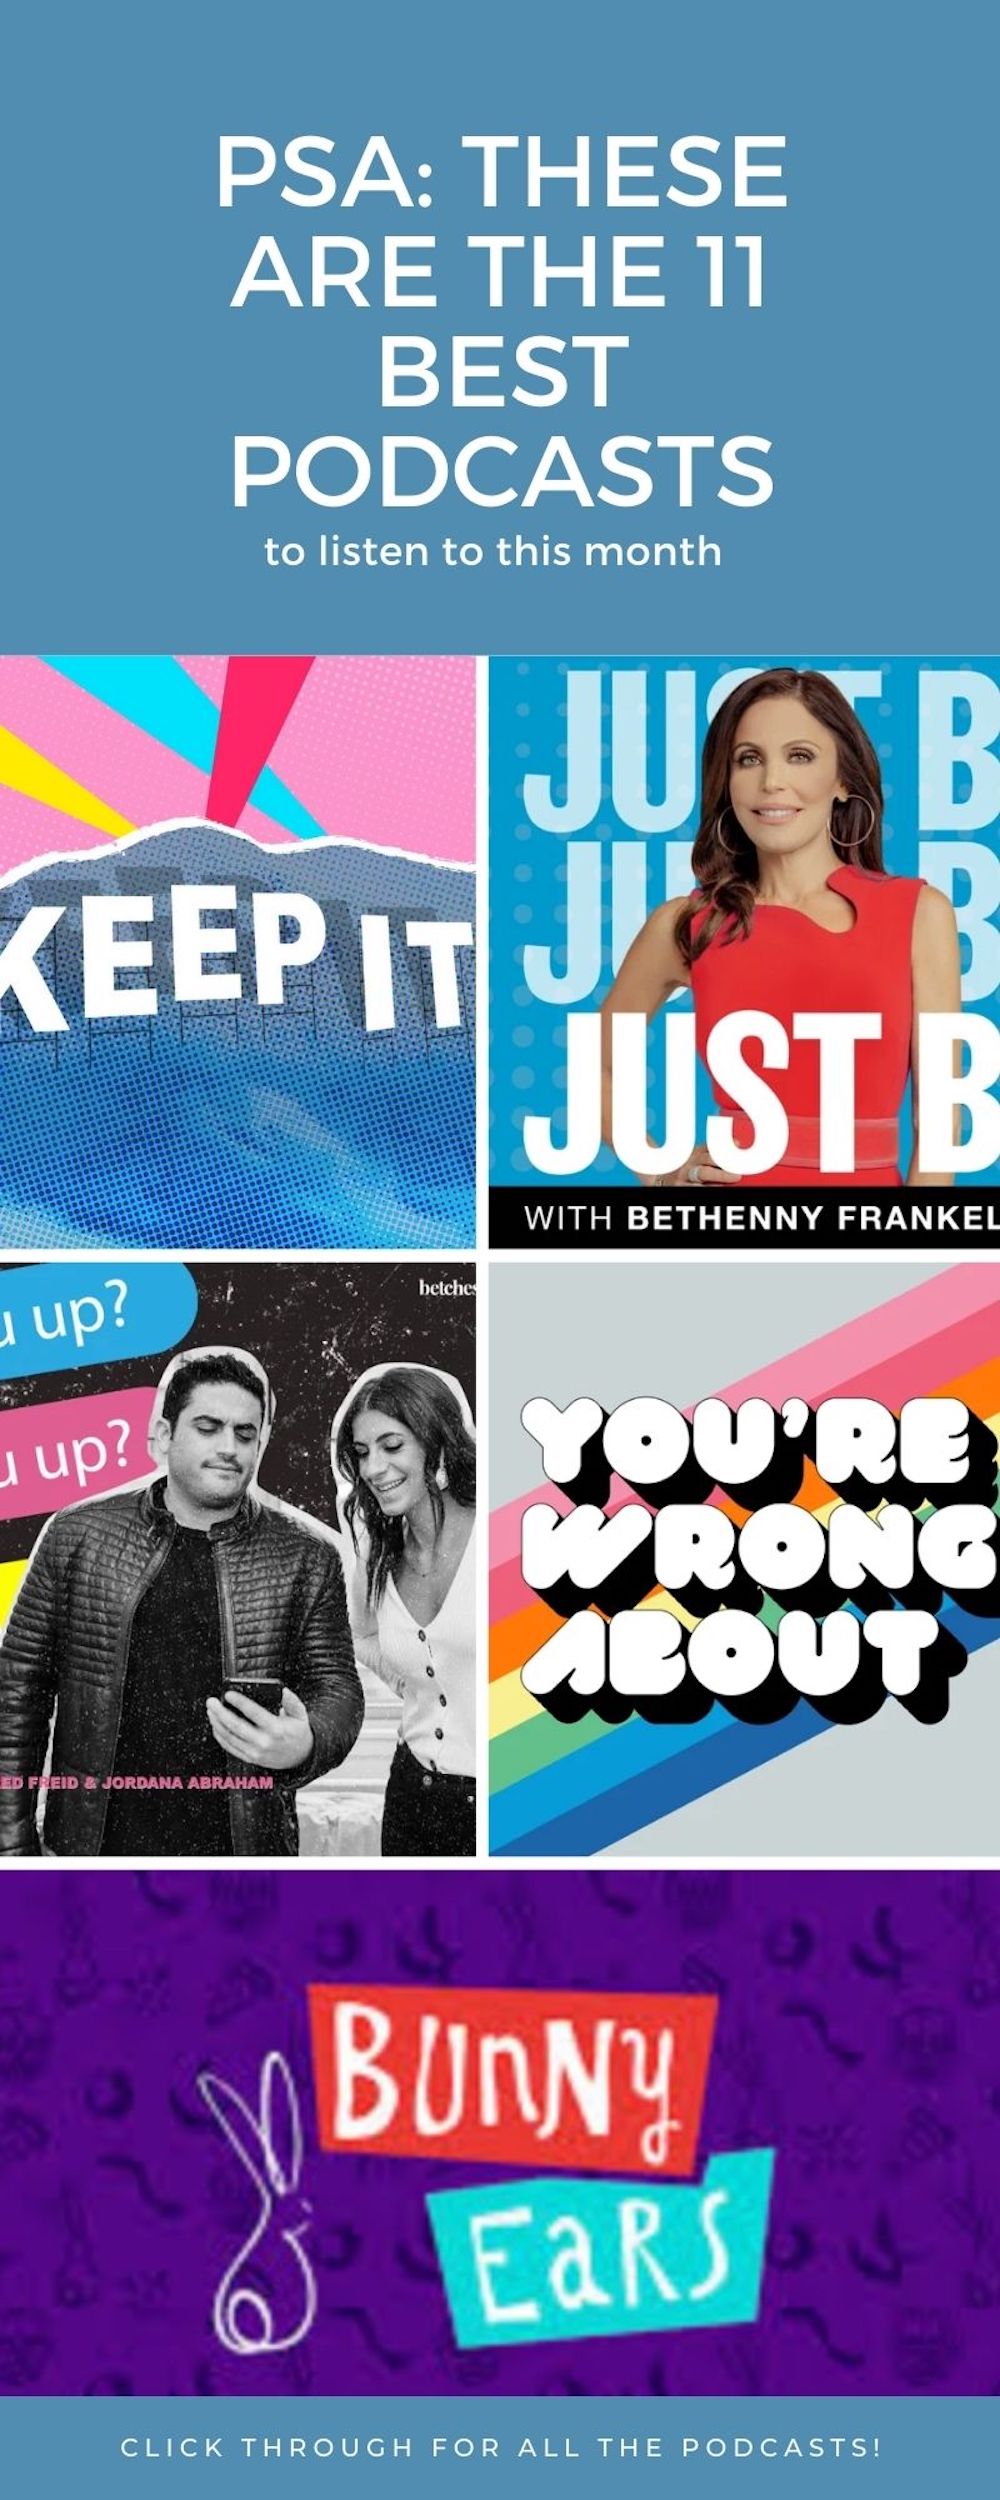 Pinterest - 11 Best Podcasts To Listen to This Month Roundup